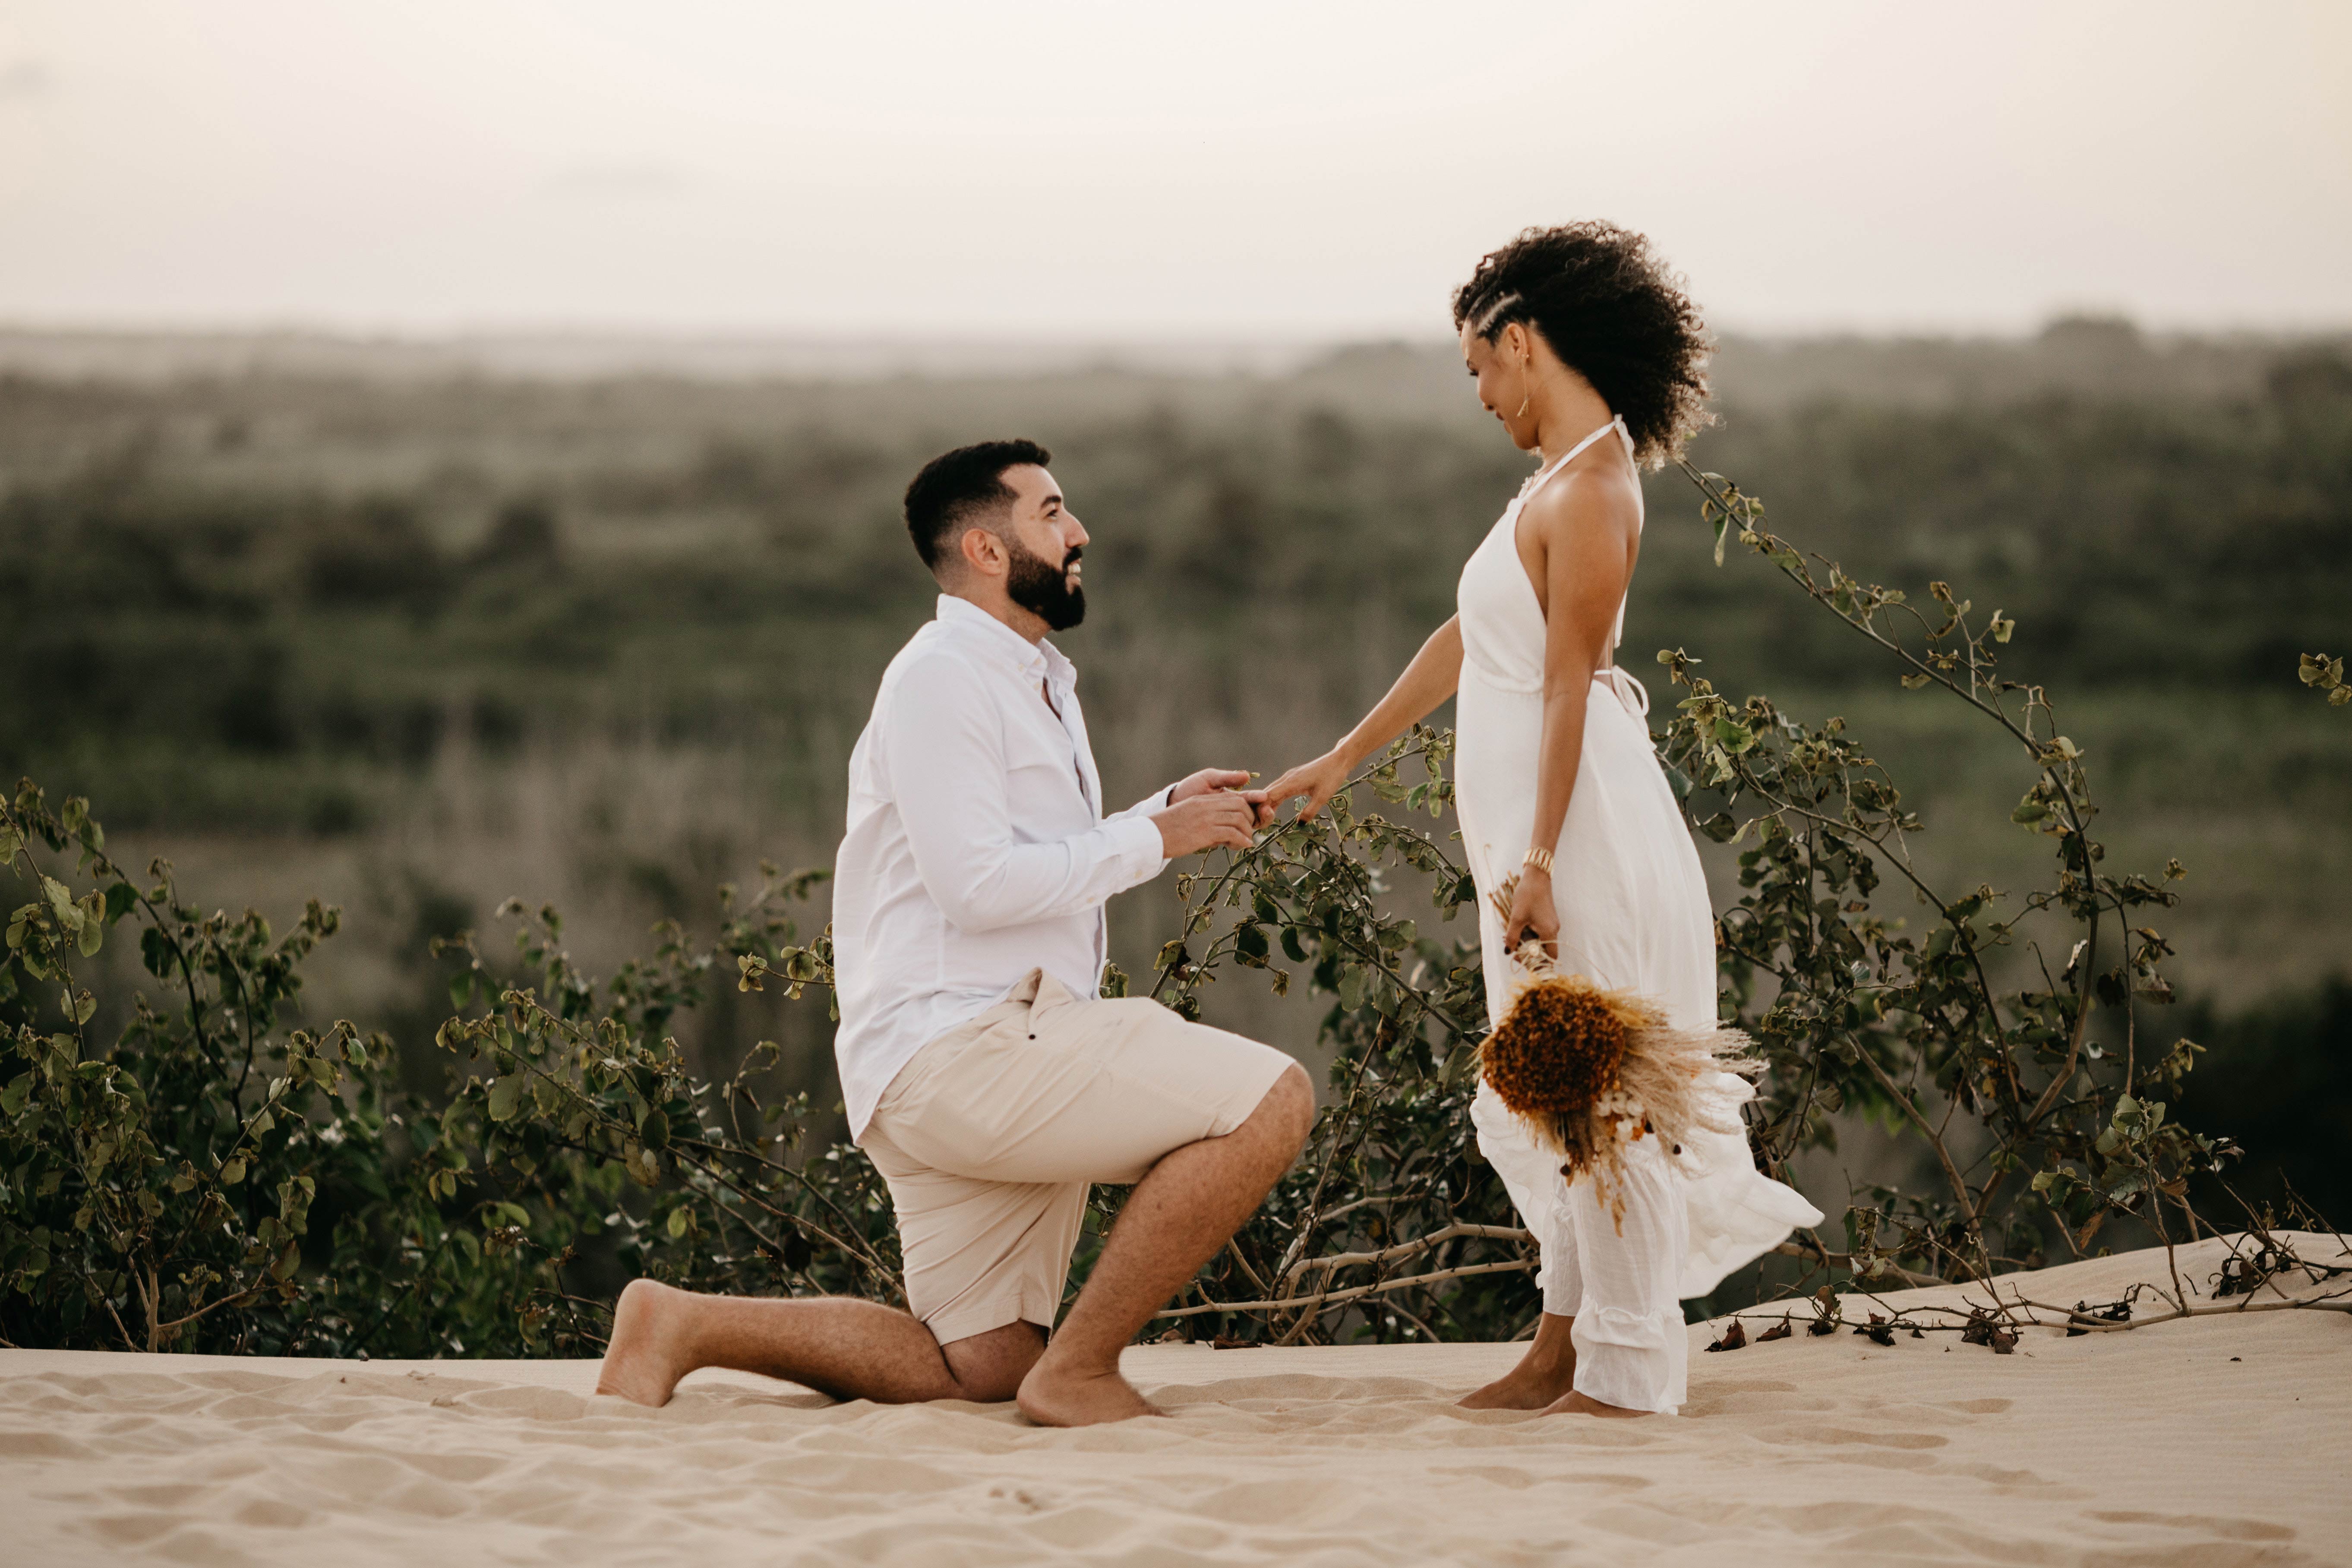 Three Budget-Friendly Ways to Propose to Your Girlfriend